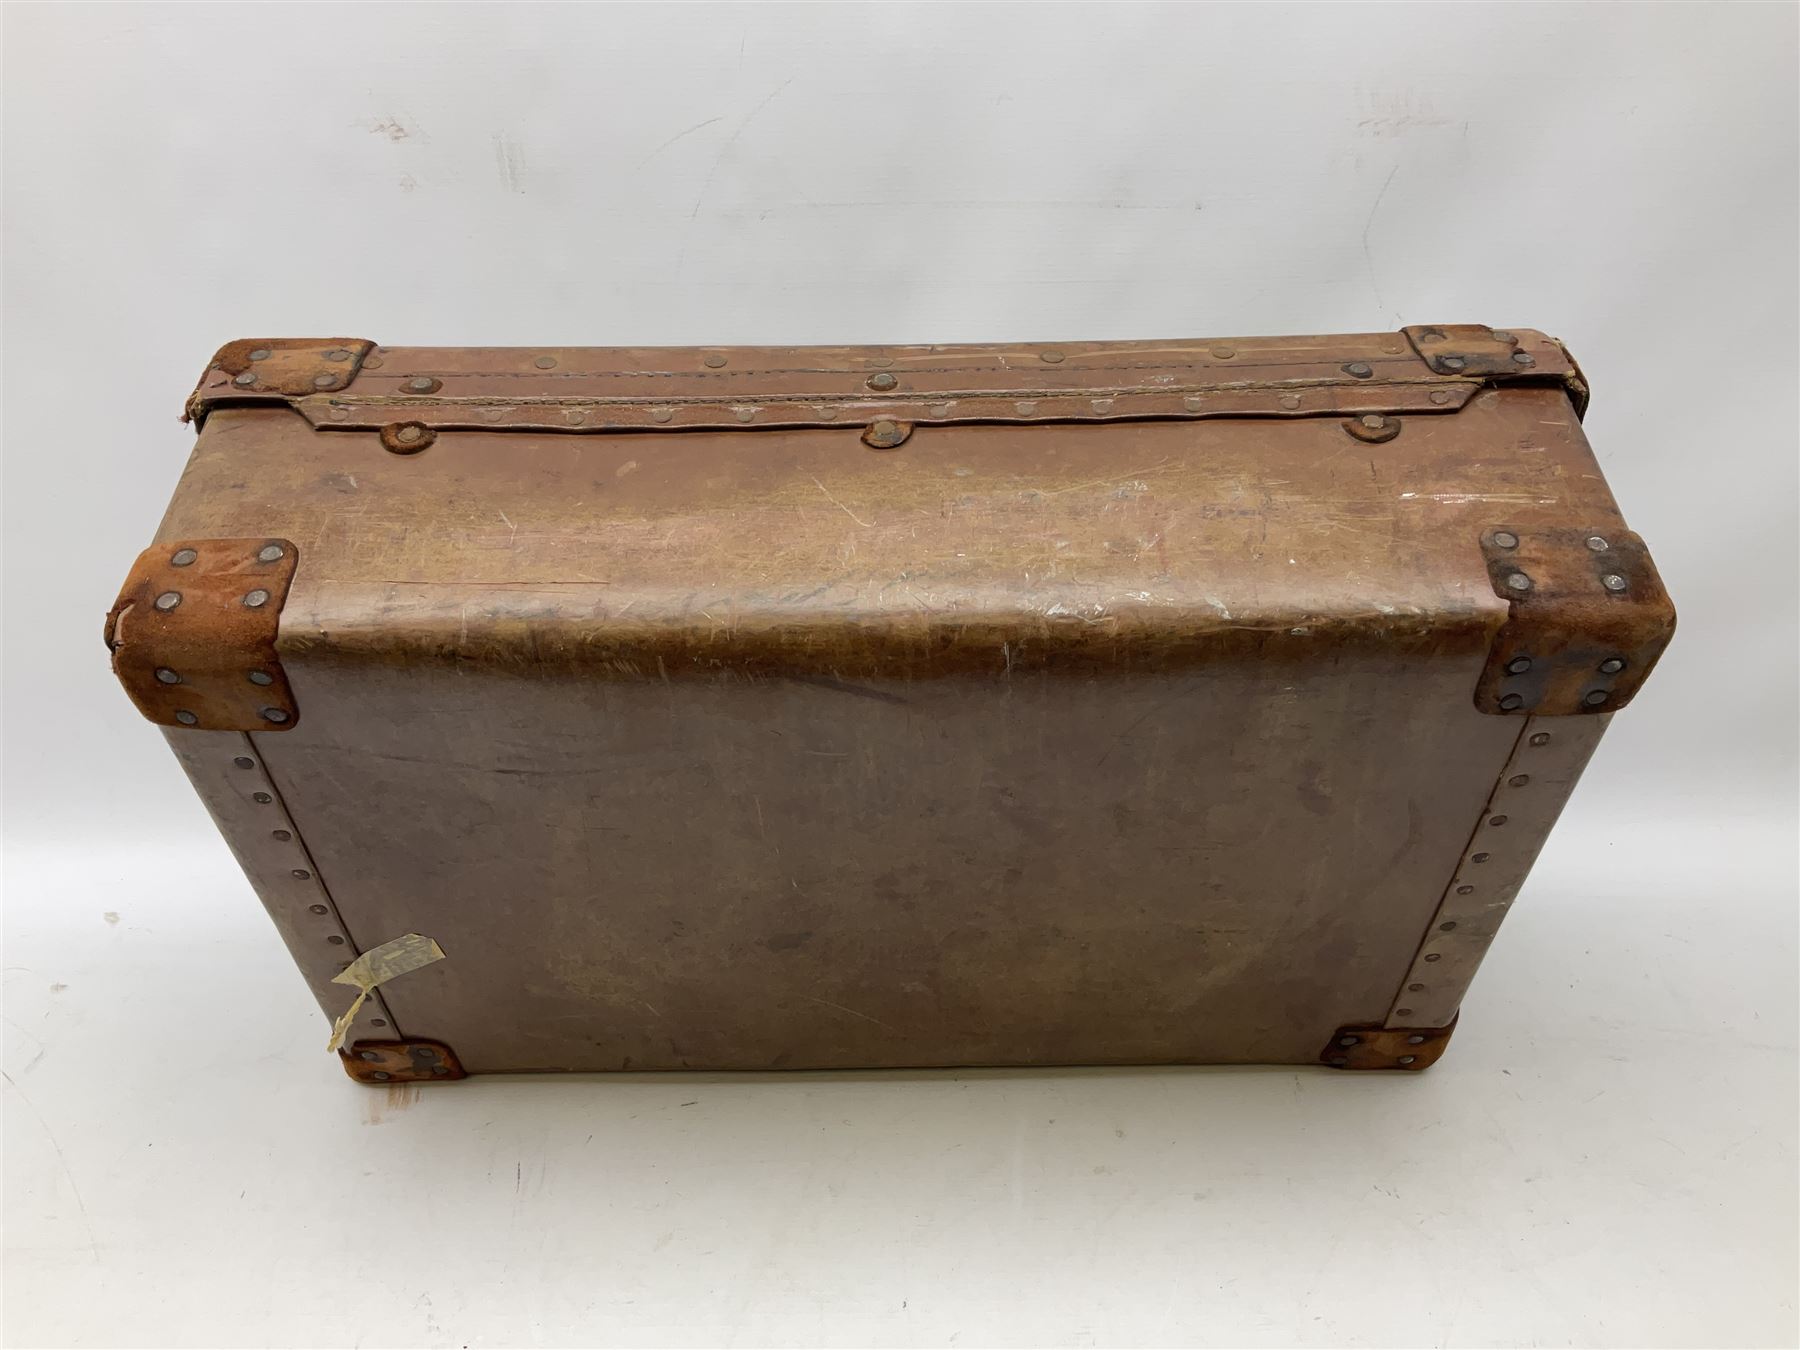 Vintage leather suitcase, by H. J. Cave and Sons of London, with